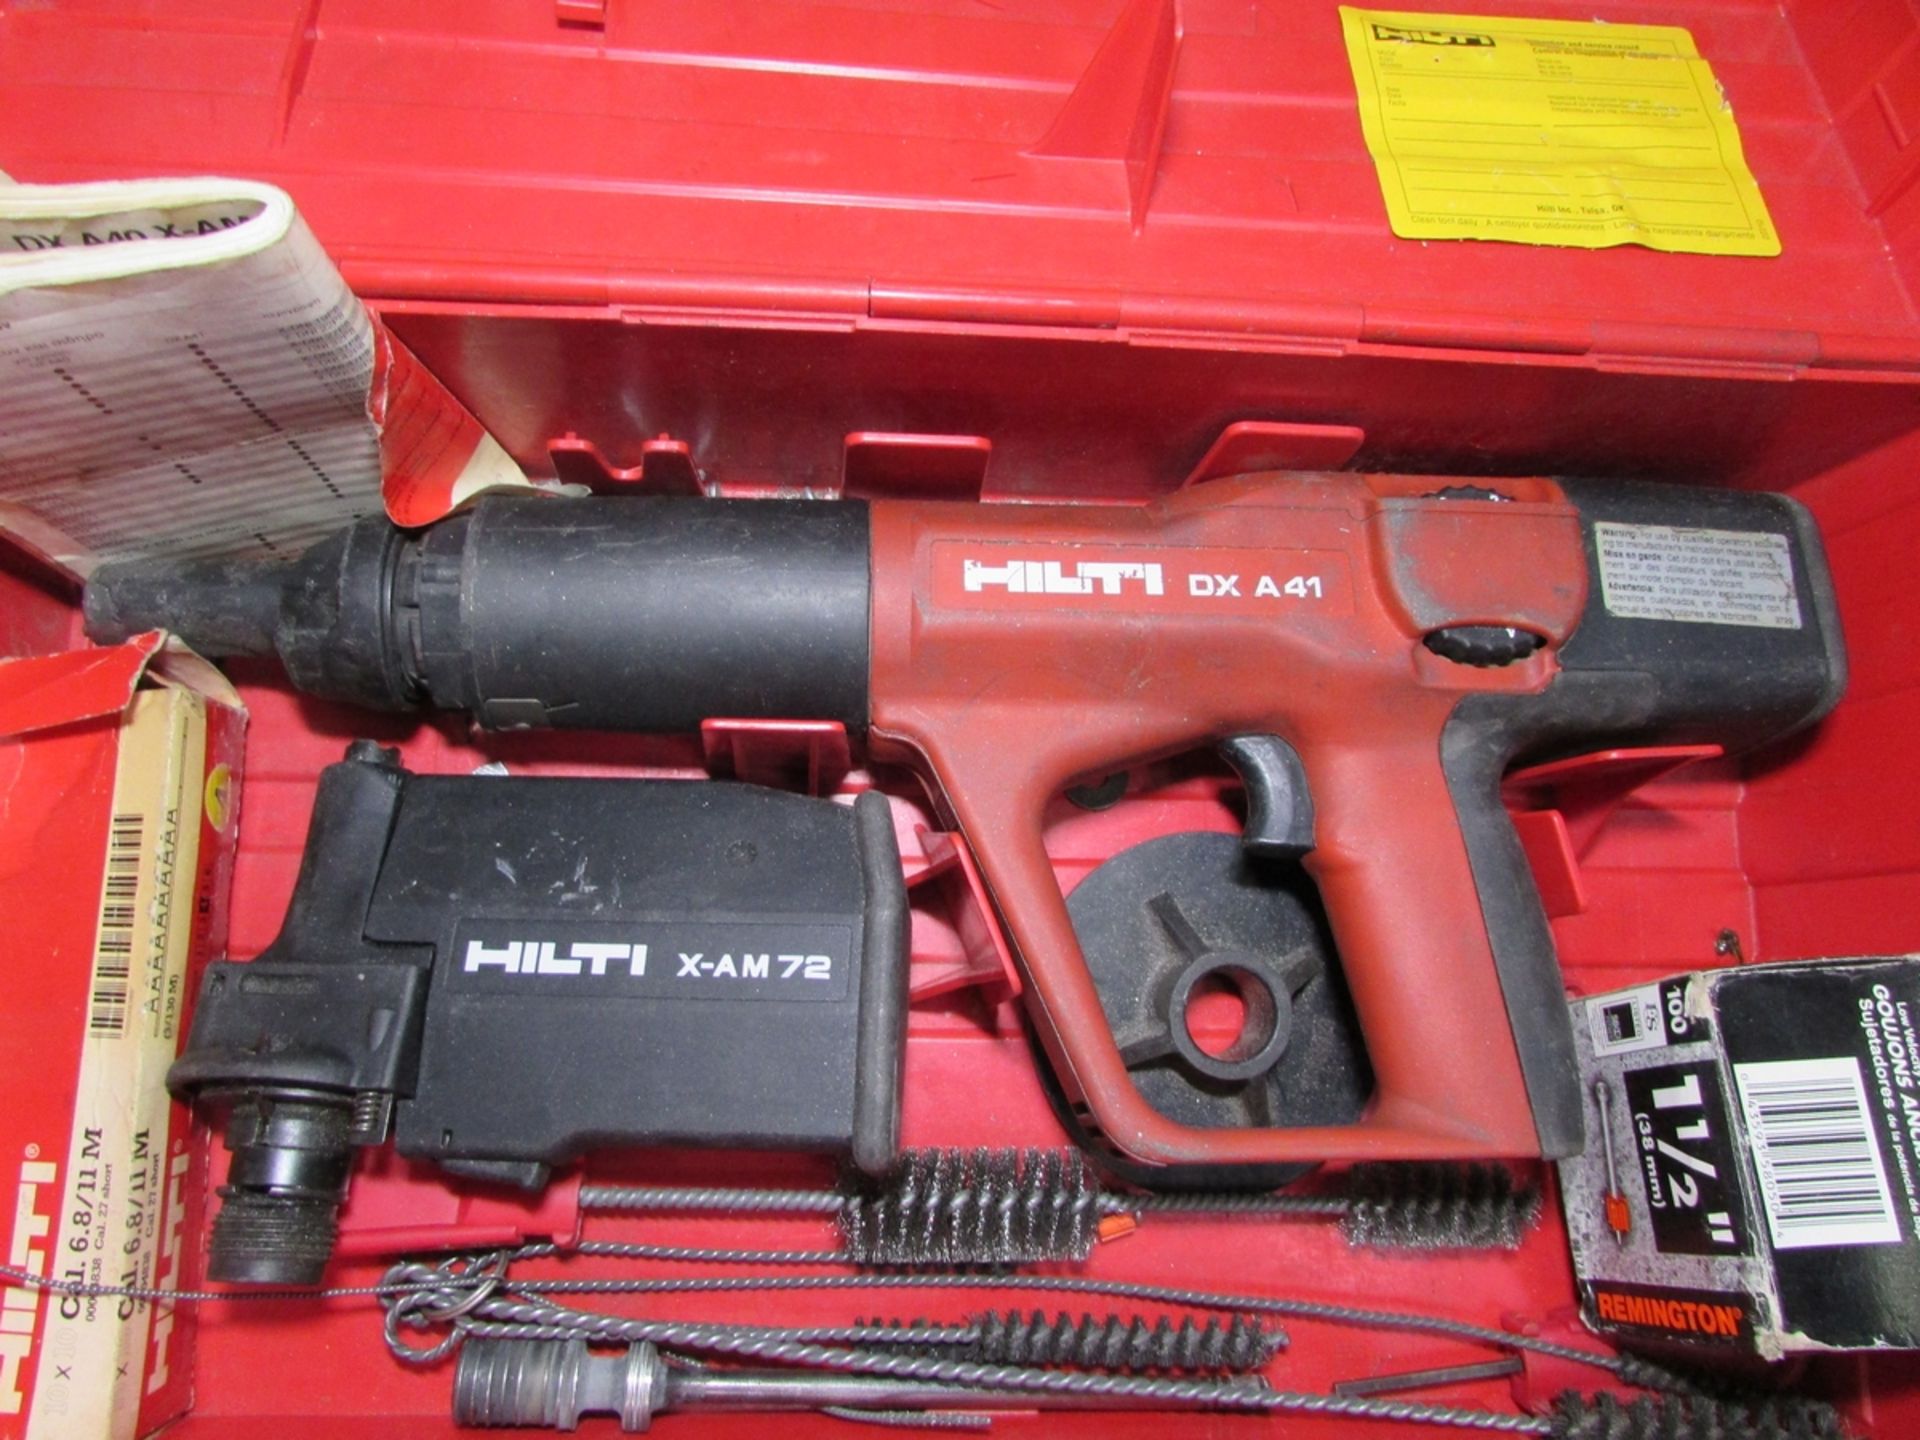 HILTI POWDER ACTUATED FASTENING TOOL, MODEL DX A41, W/ HILTI X-AM72 MAGAZINE ATTACHMENT - Image 3 of 3